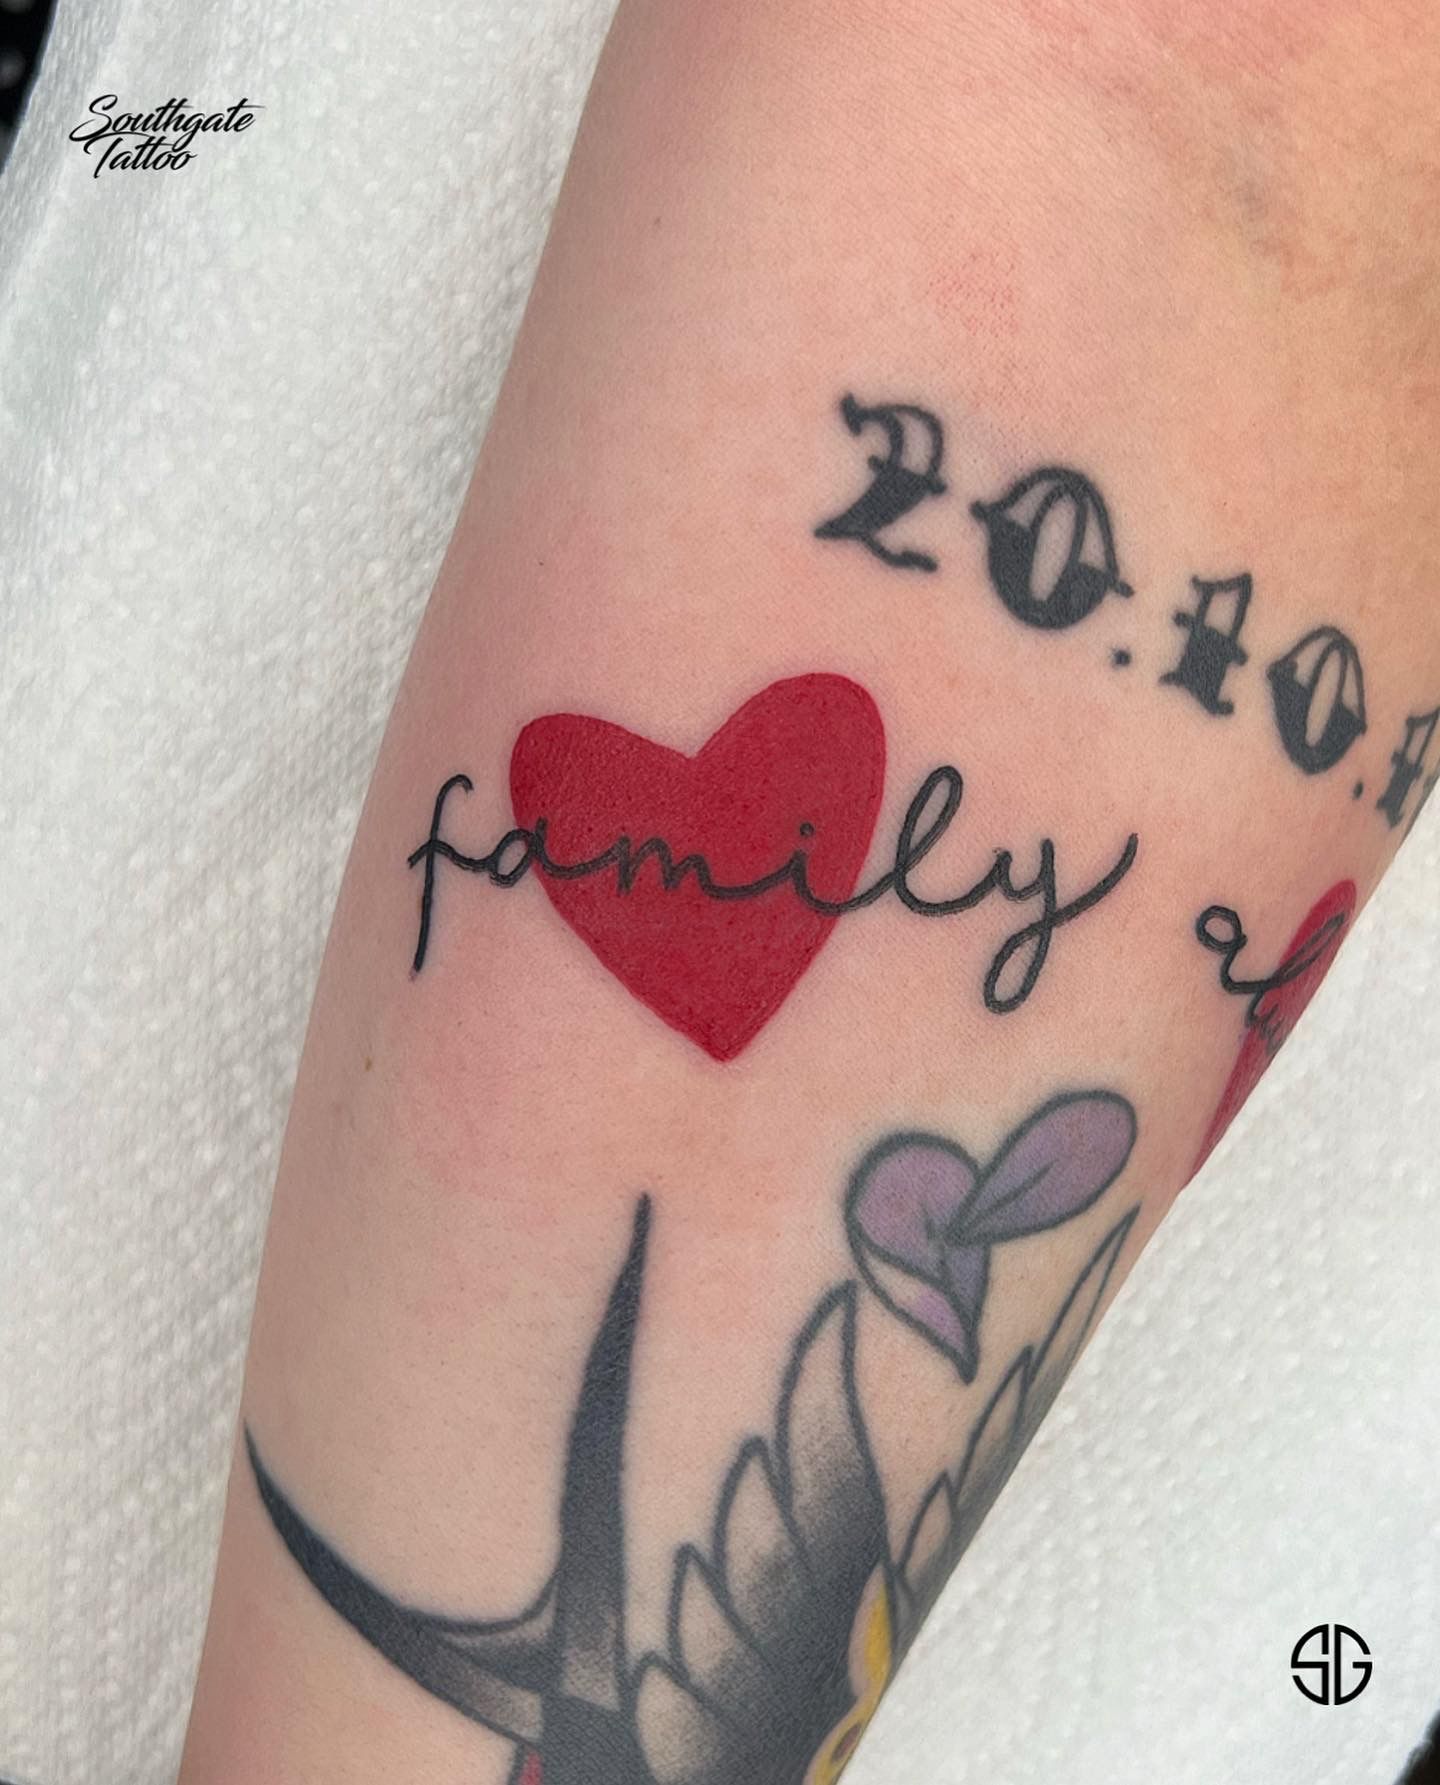 Family love heart piece done by Ange   Lakeside Tattoos  Facebook